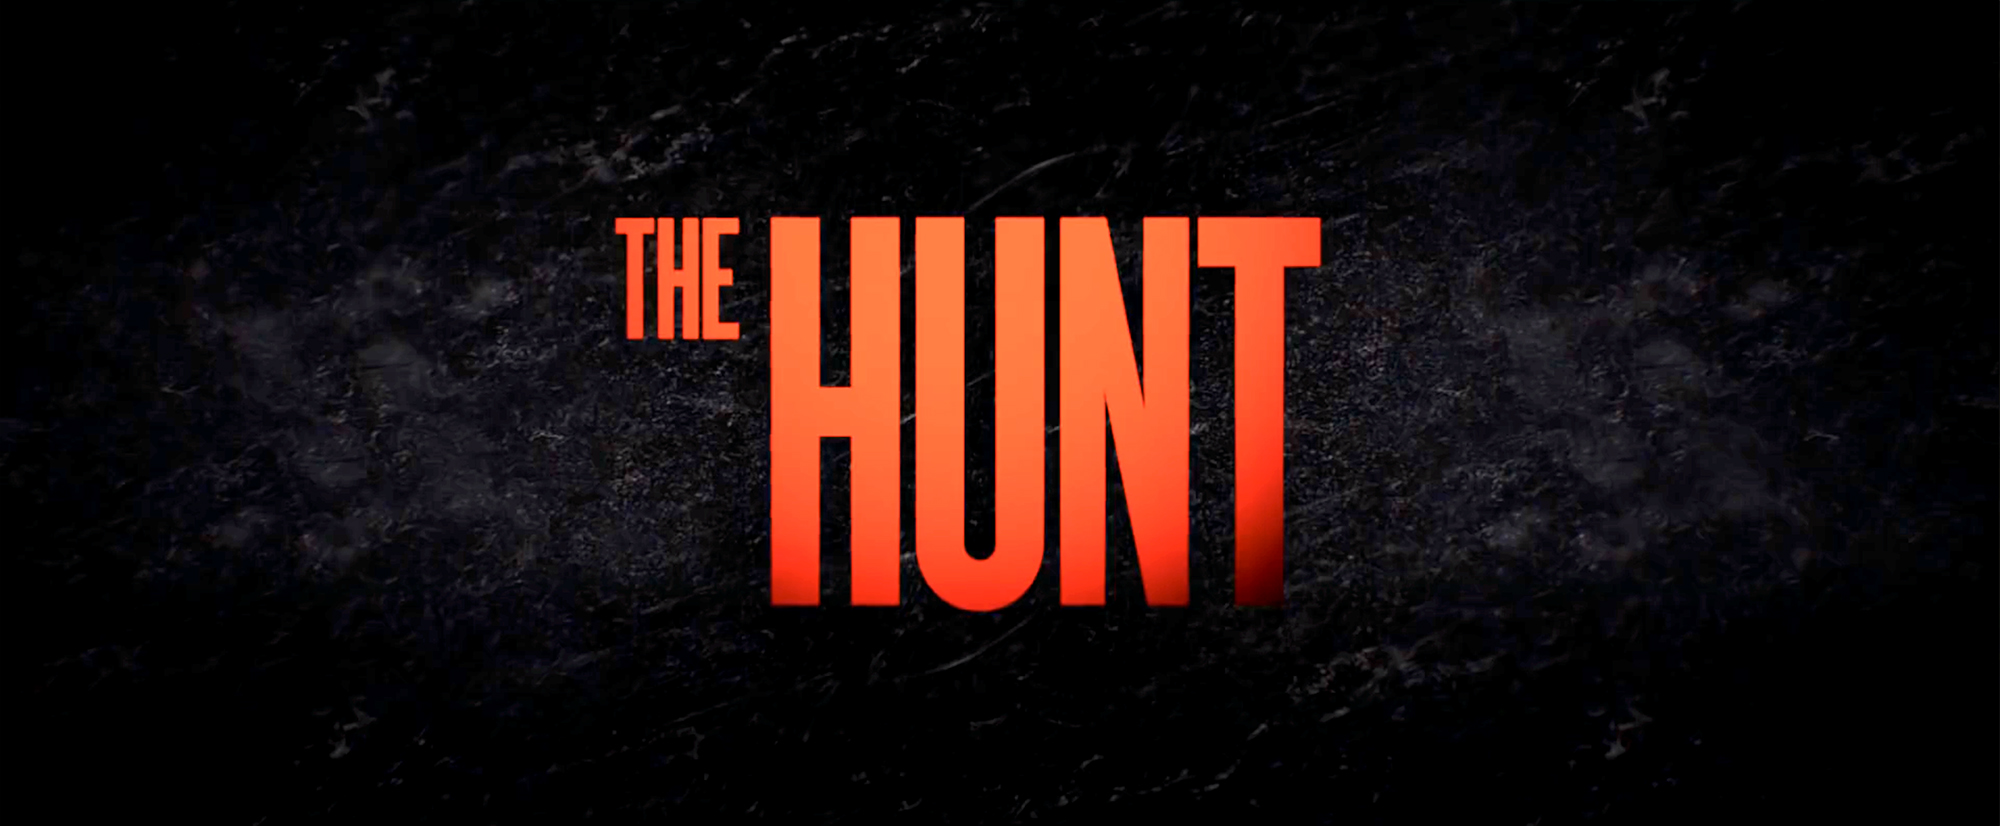 The Hunt (2020) Wallpapers